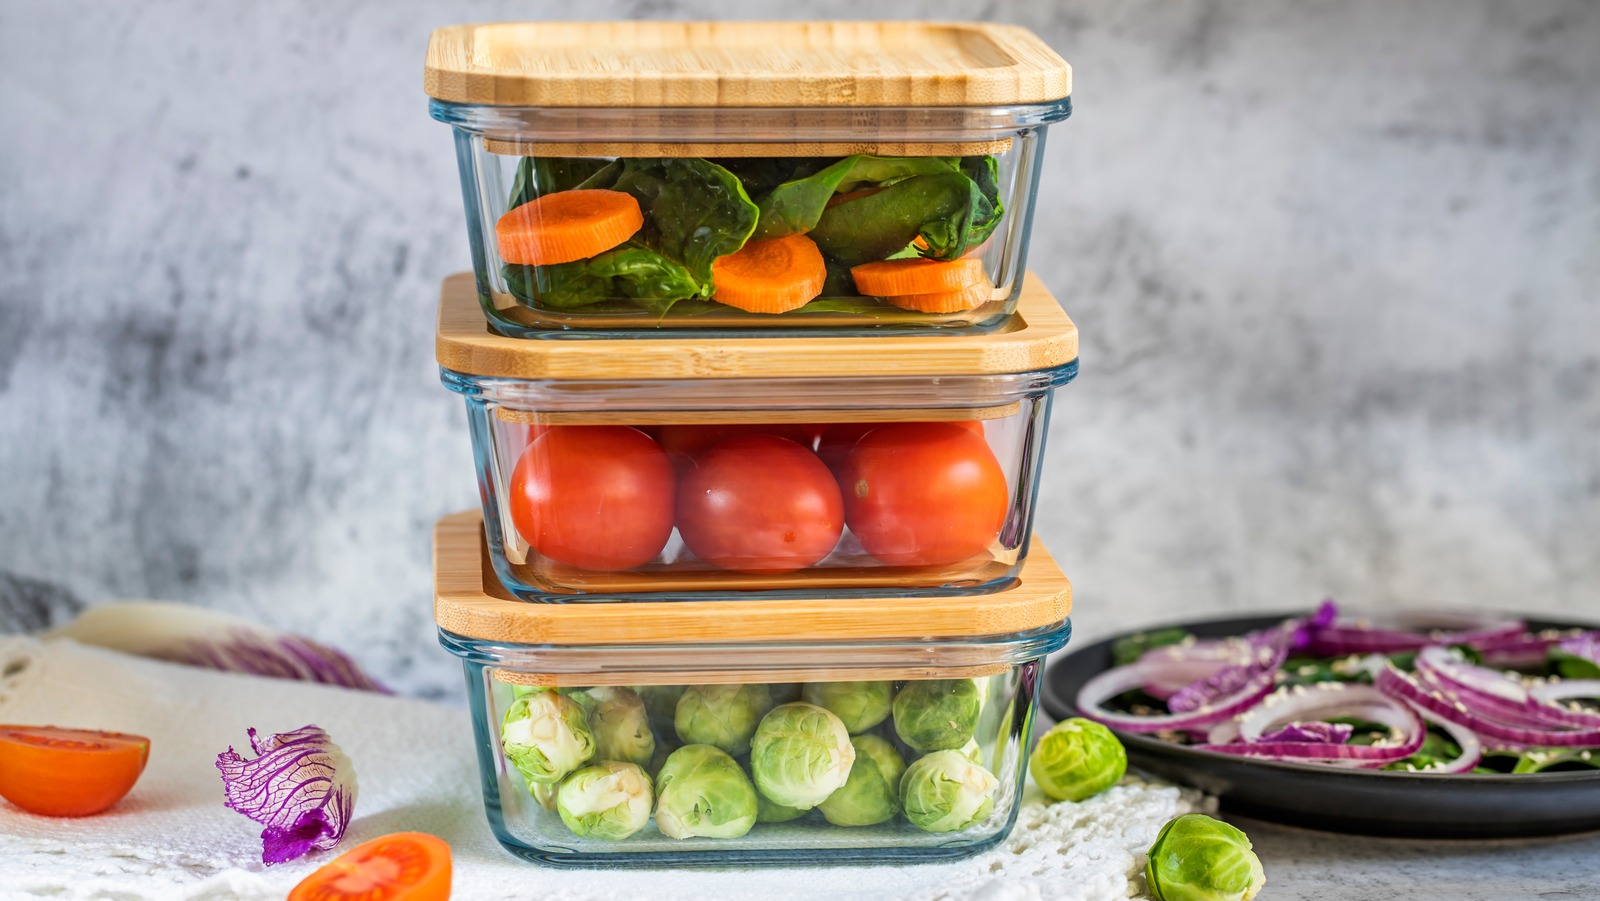 A Mini Cutting Board at Your Desk Means You'll Never Have to Meal Prep  Again